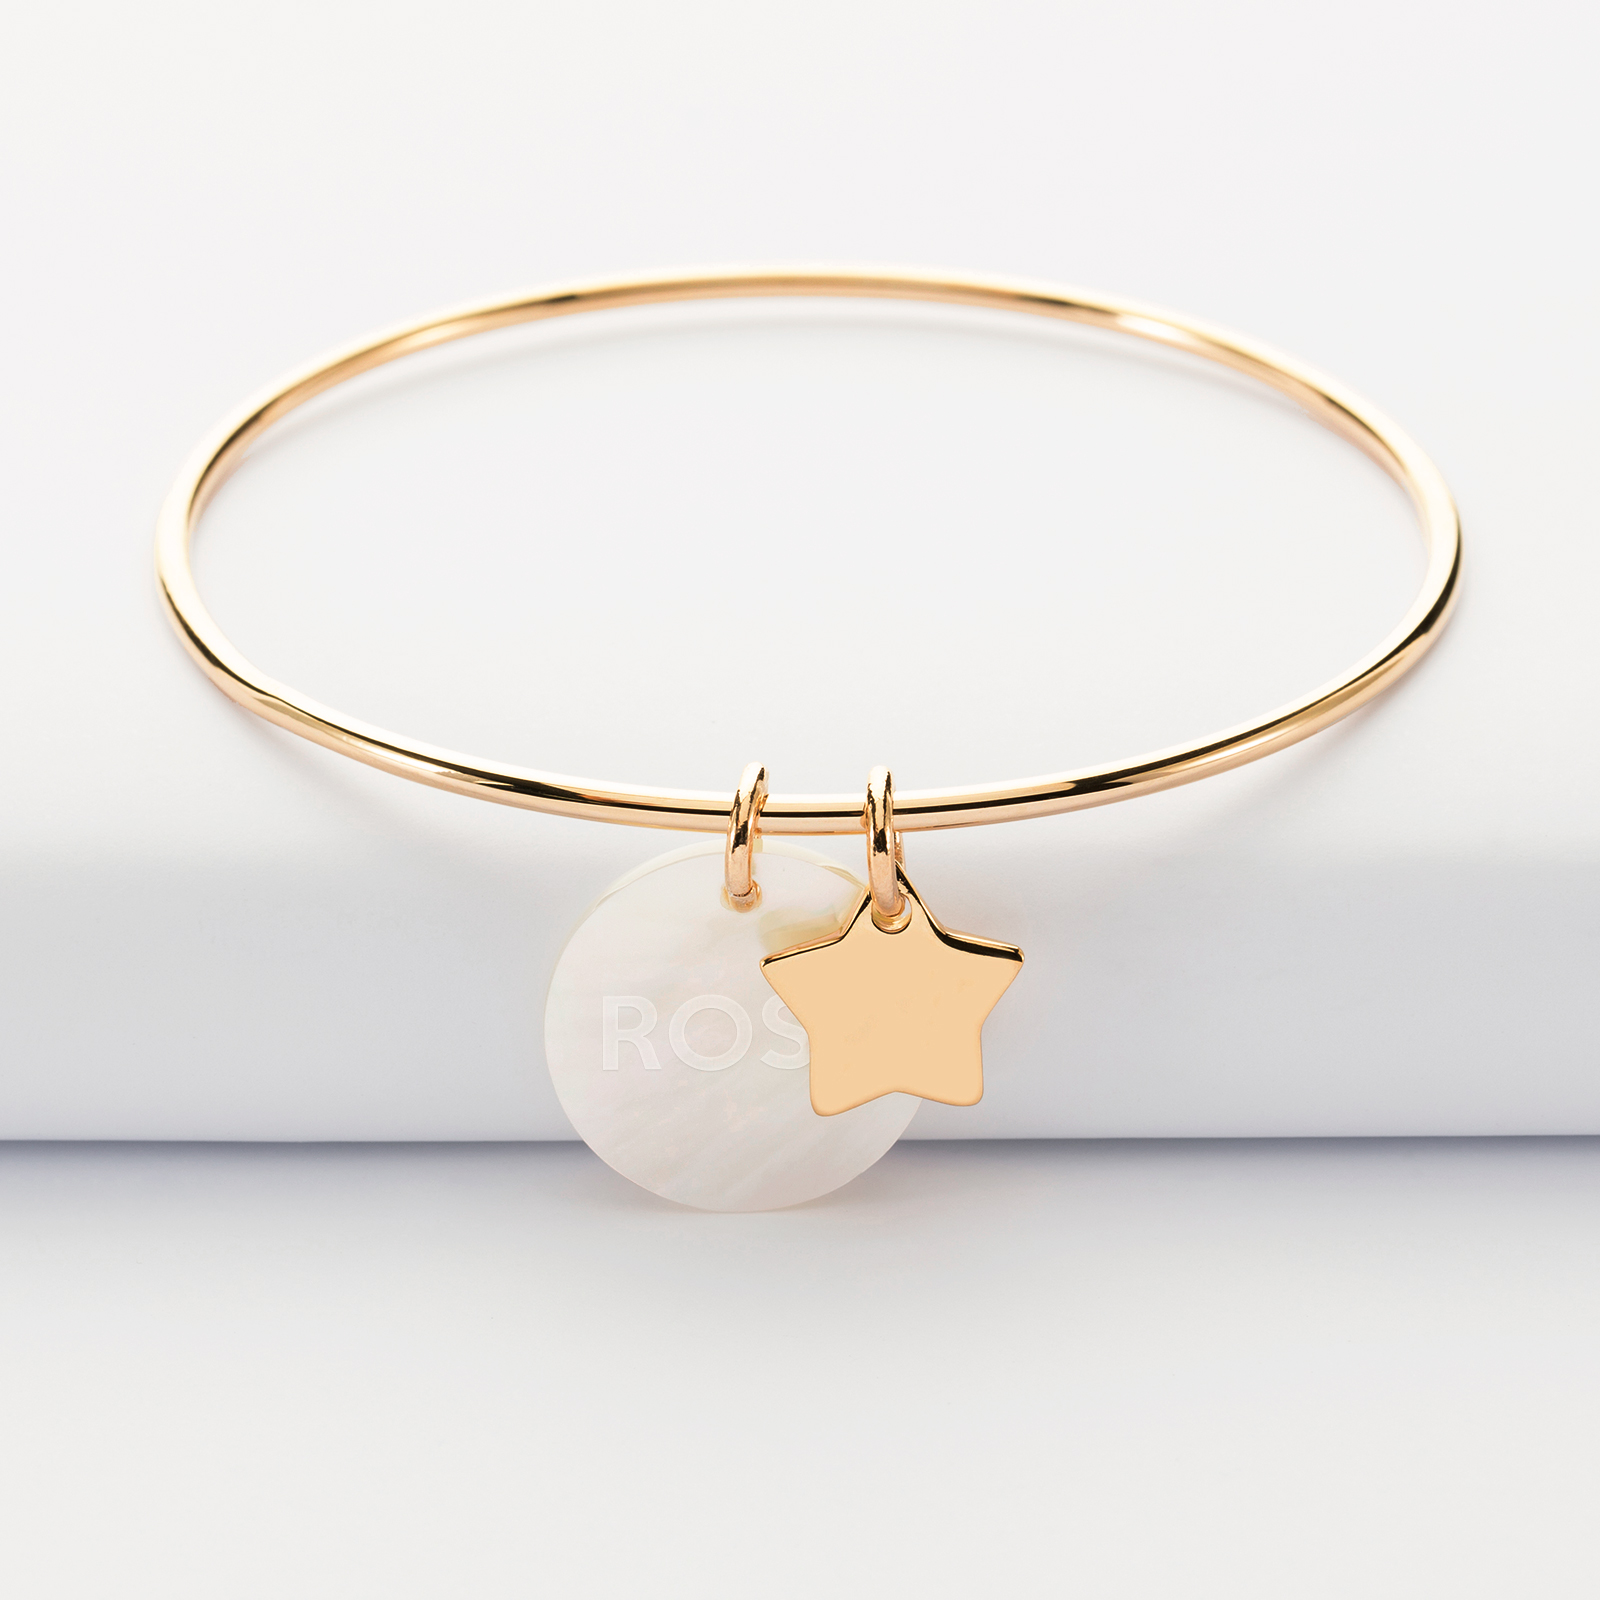 Personalised engraved mother-of-pearl medallion bangle 19 mm and gold-plated star charm 12 mm - name